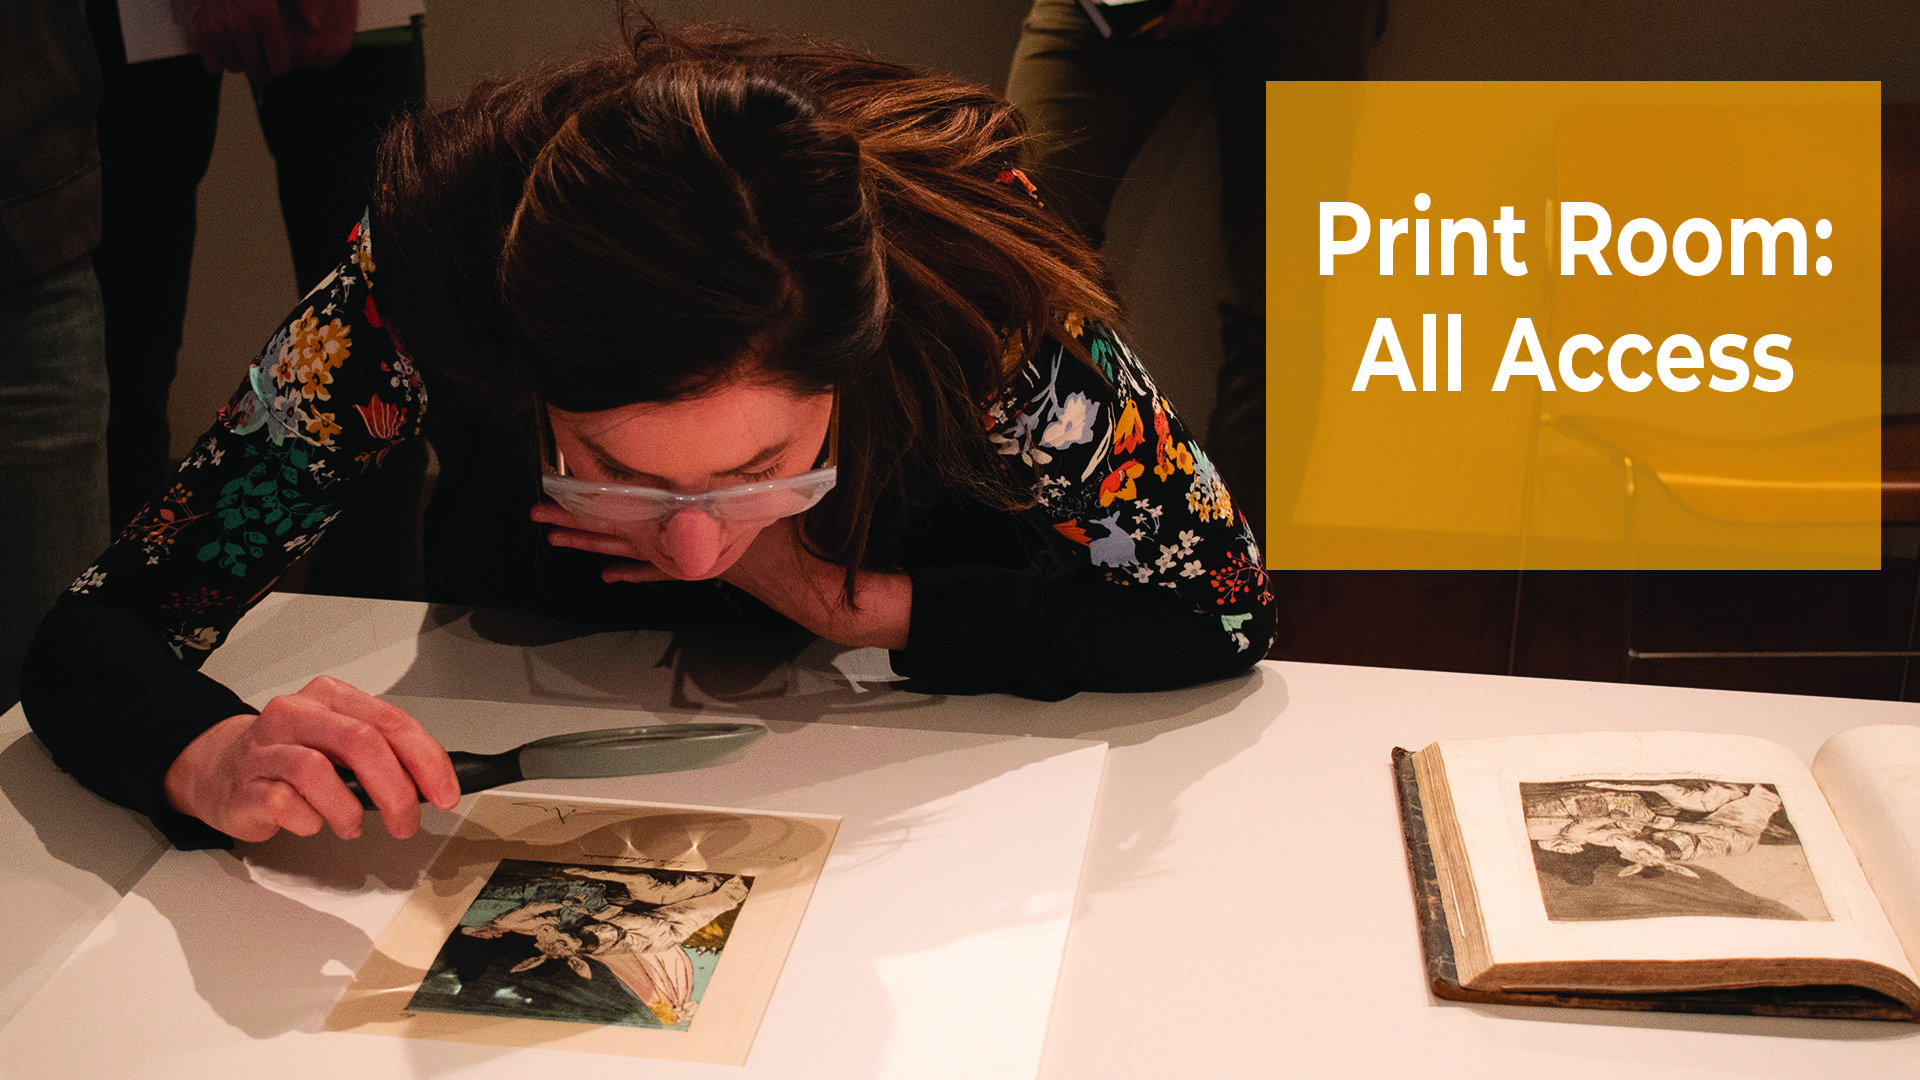 Copy of Print Room: All Access at the Chazen Museum of Art